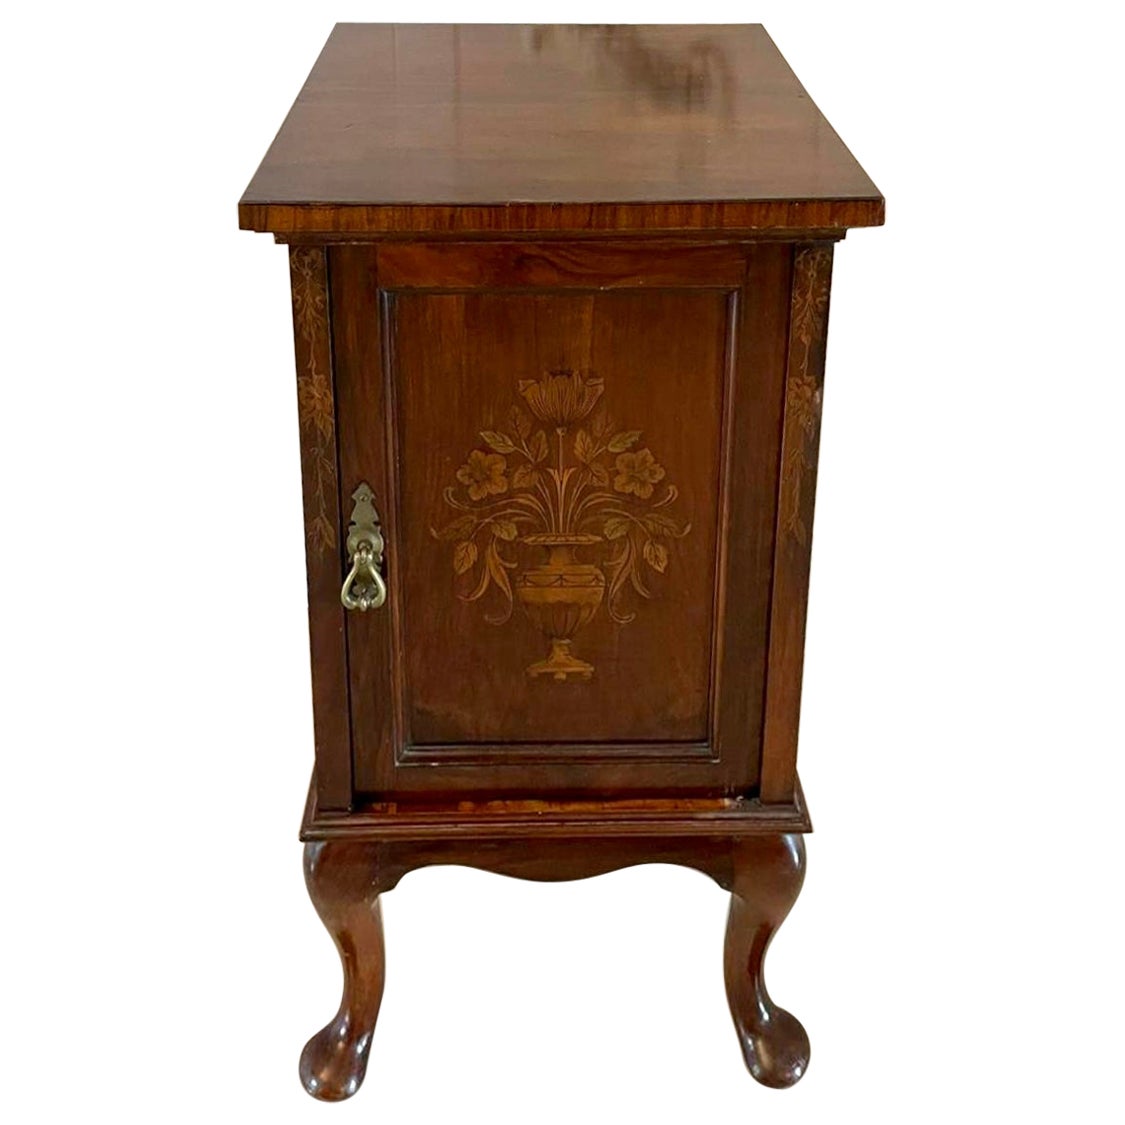 Outstanding Quality Antique Walnut Floral Marquetry Inlaid Bedside Cabinet